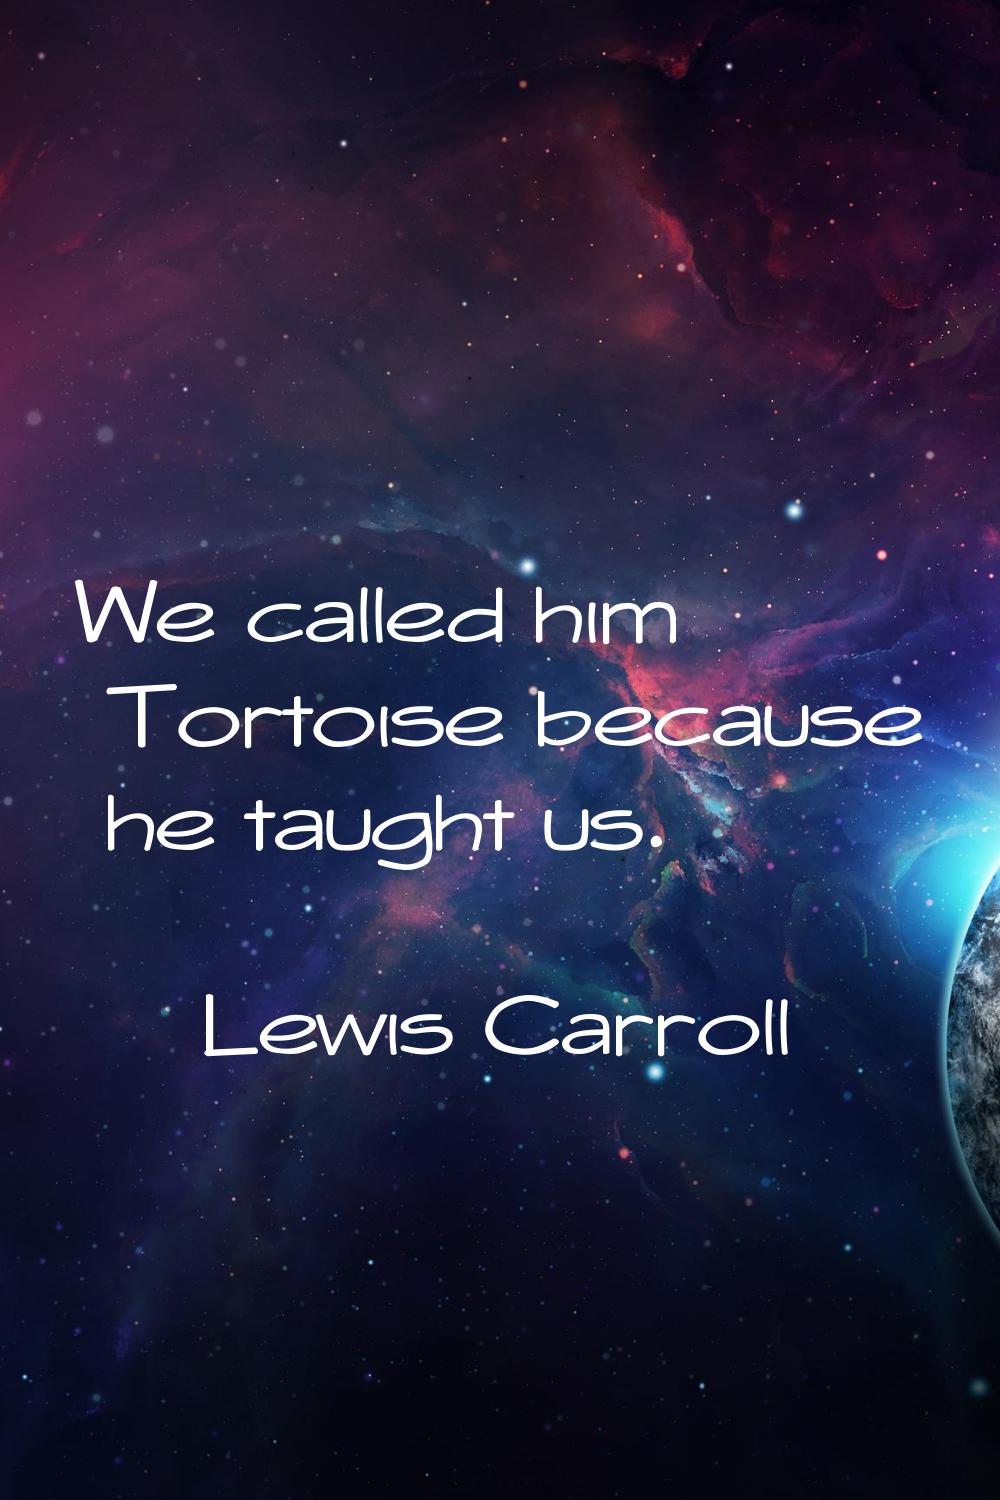 We called him Tortoise because he taught us.